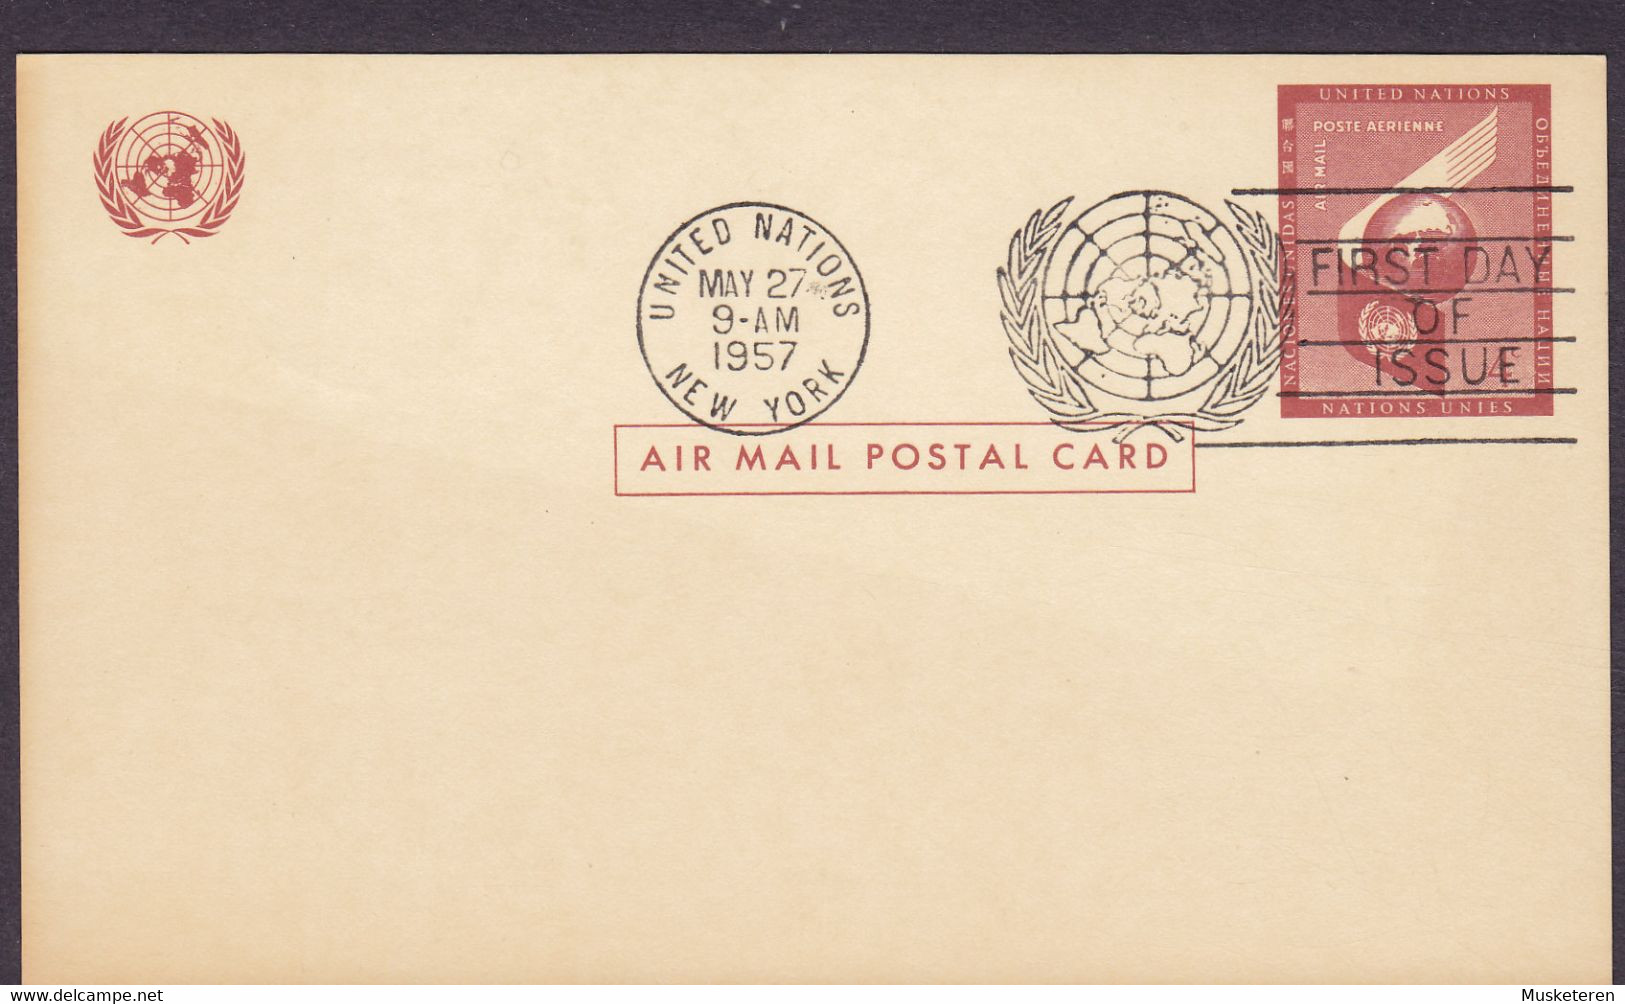 United Nations Postal Stationery Ganzsache Entier NEW YORK First Day Of Issue 1957 Air Mail Postal Card - Storia Postale